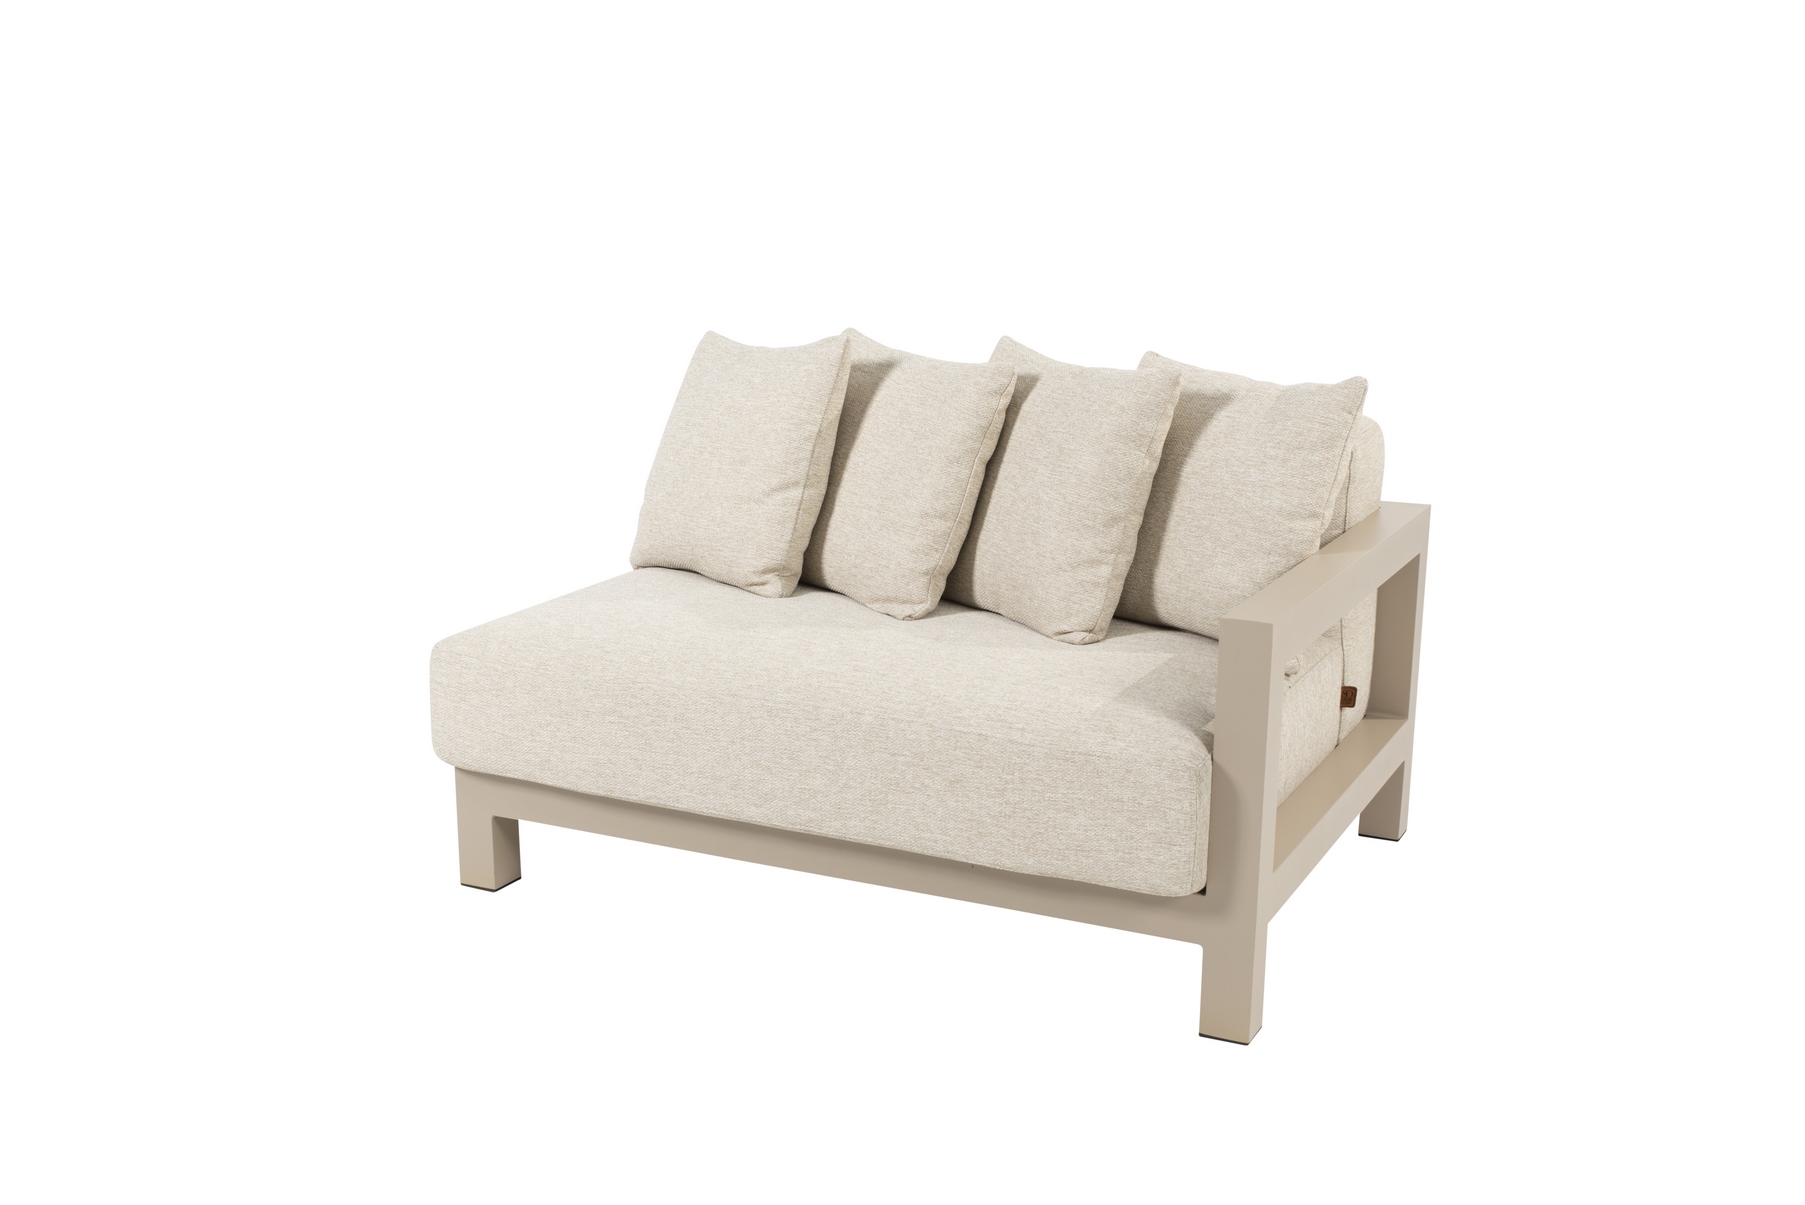 19869__Raffinato_living_bench_1_5_seater_left_latte_with_6_cushions_01.jpg